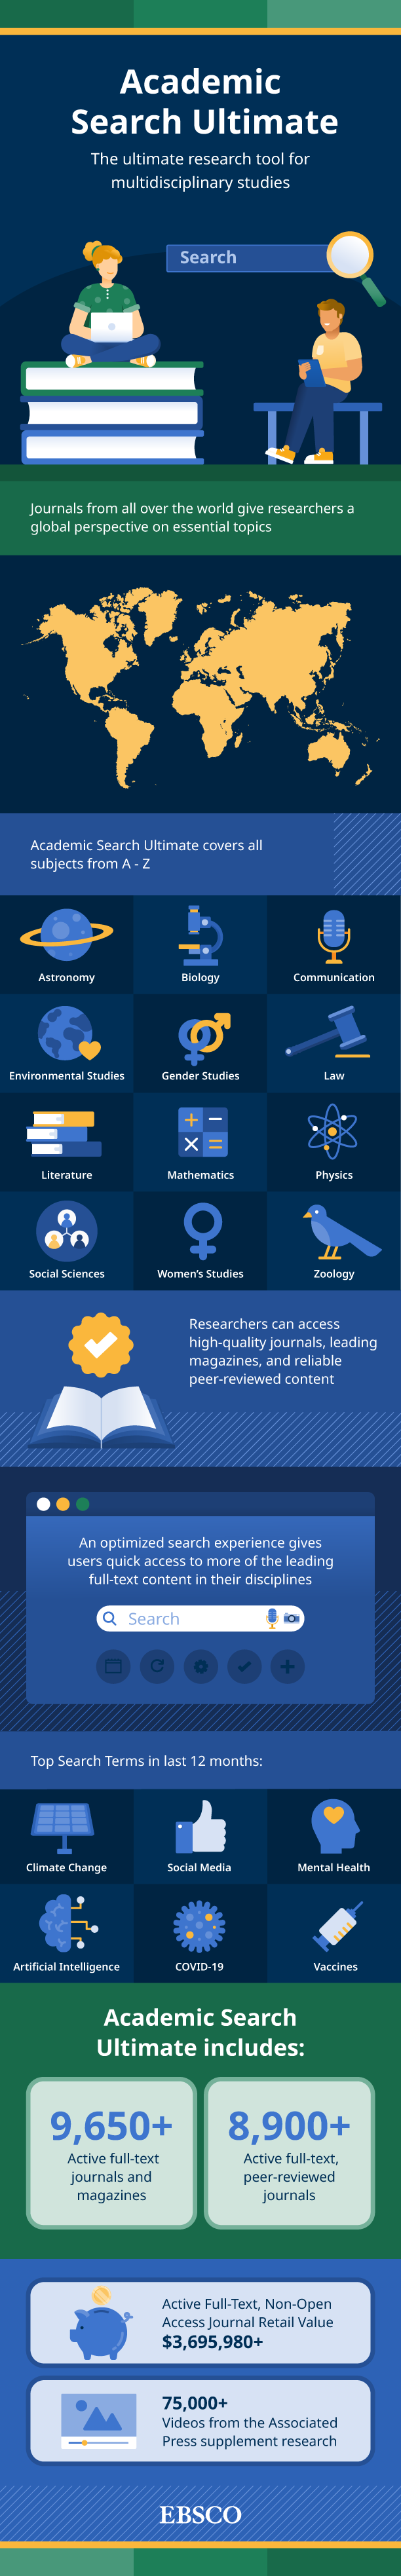 Academic Search Ultimate Infographic    